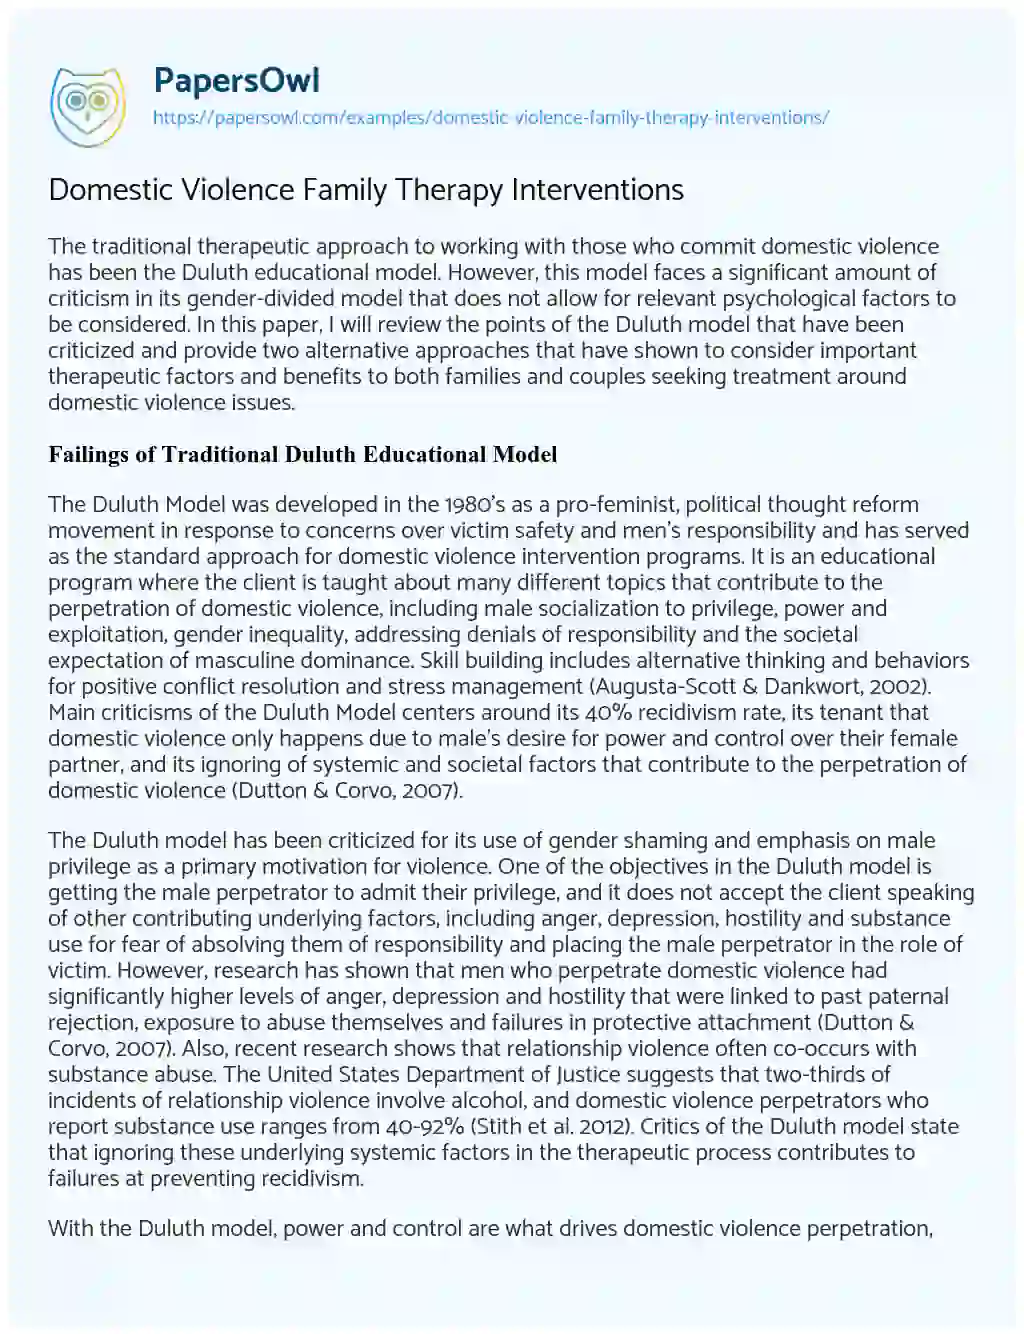 family therapy essay conclusion